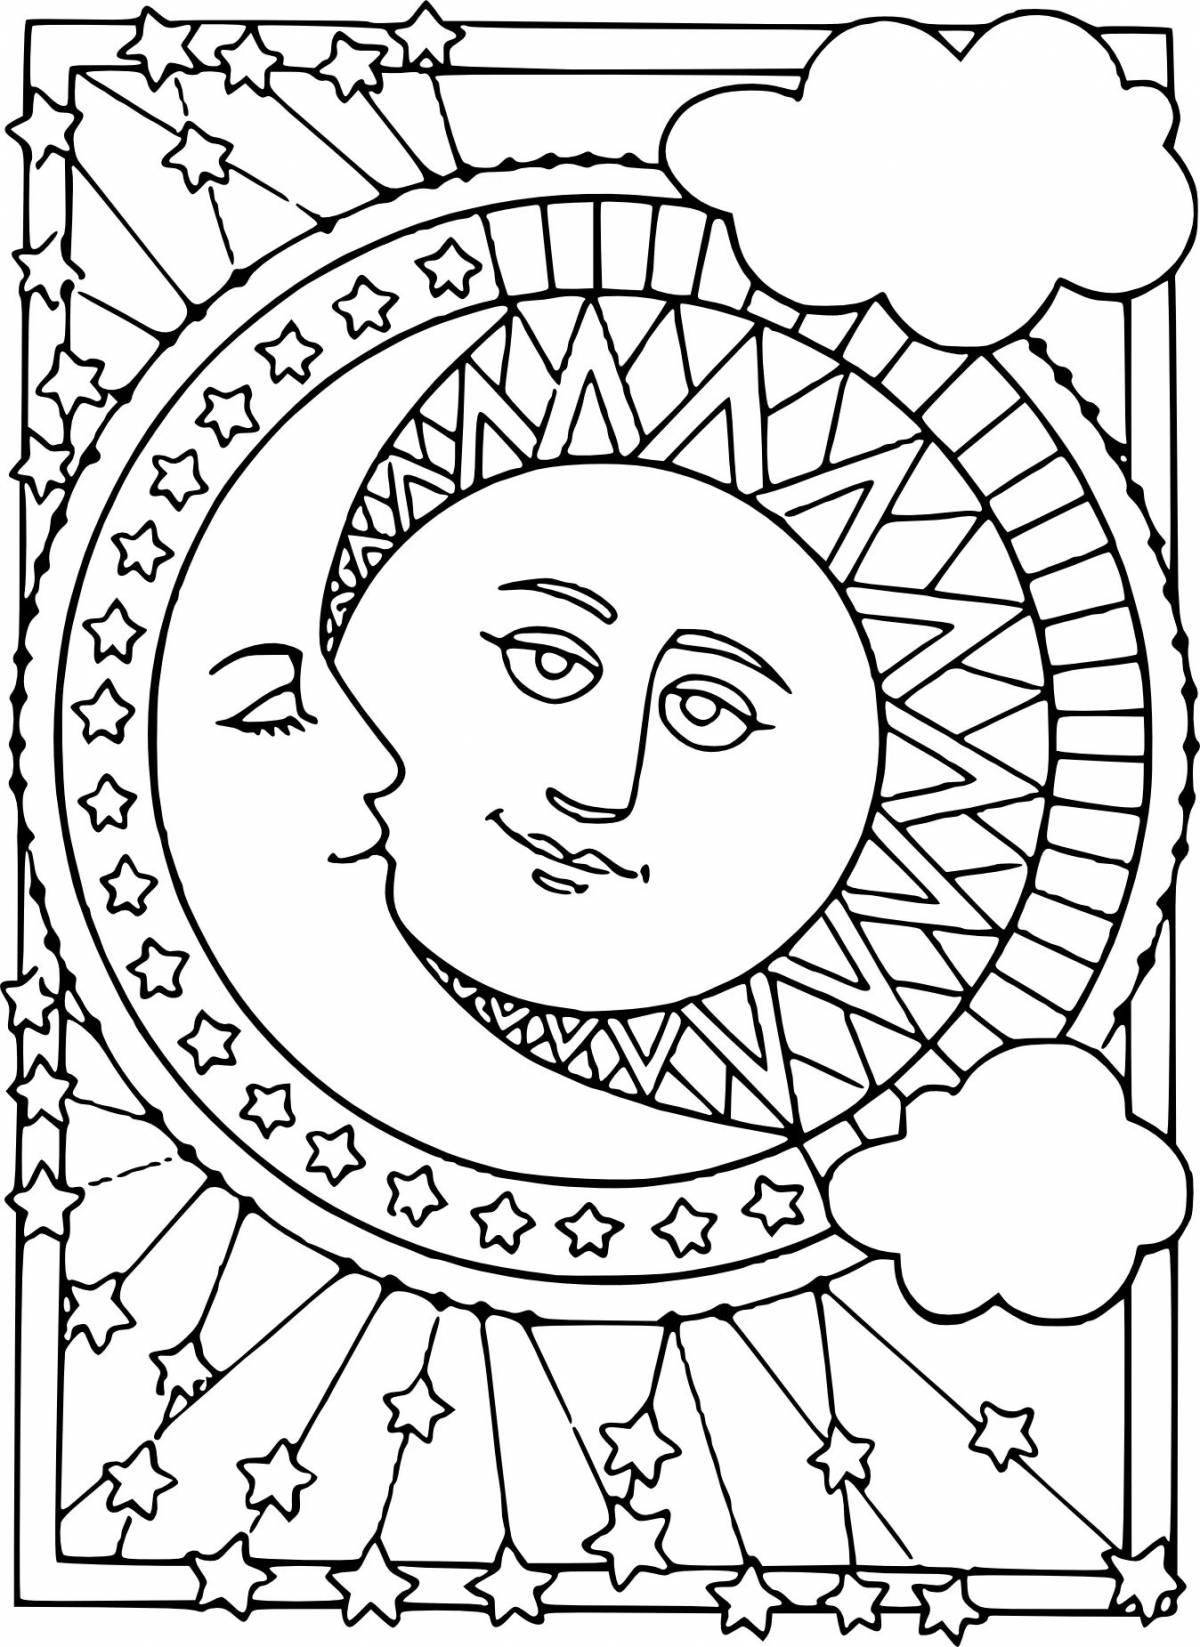 Bright coloring moon and sun for kids